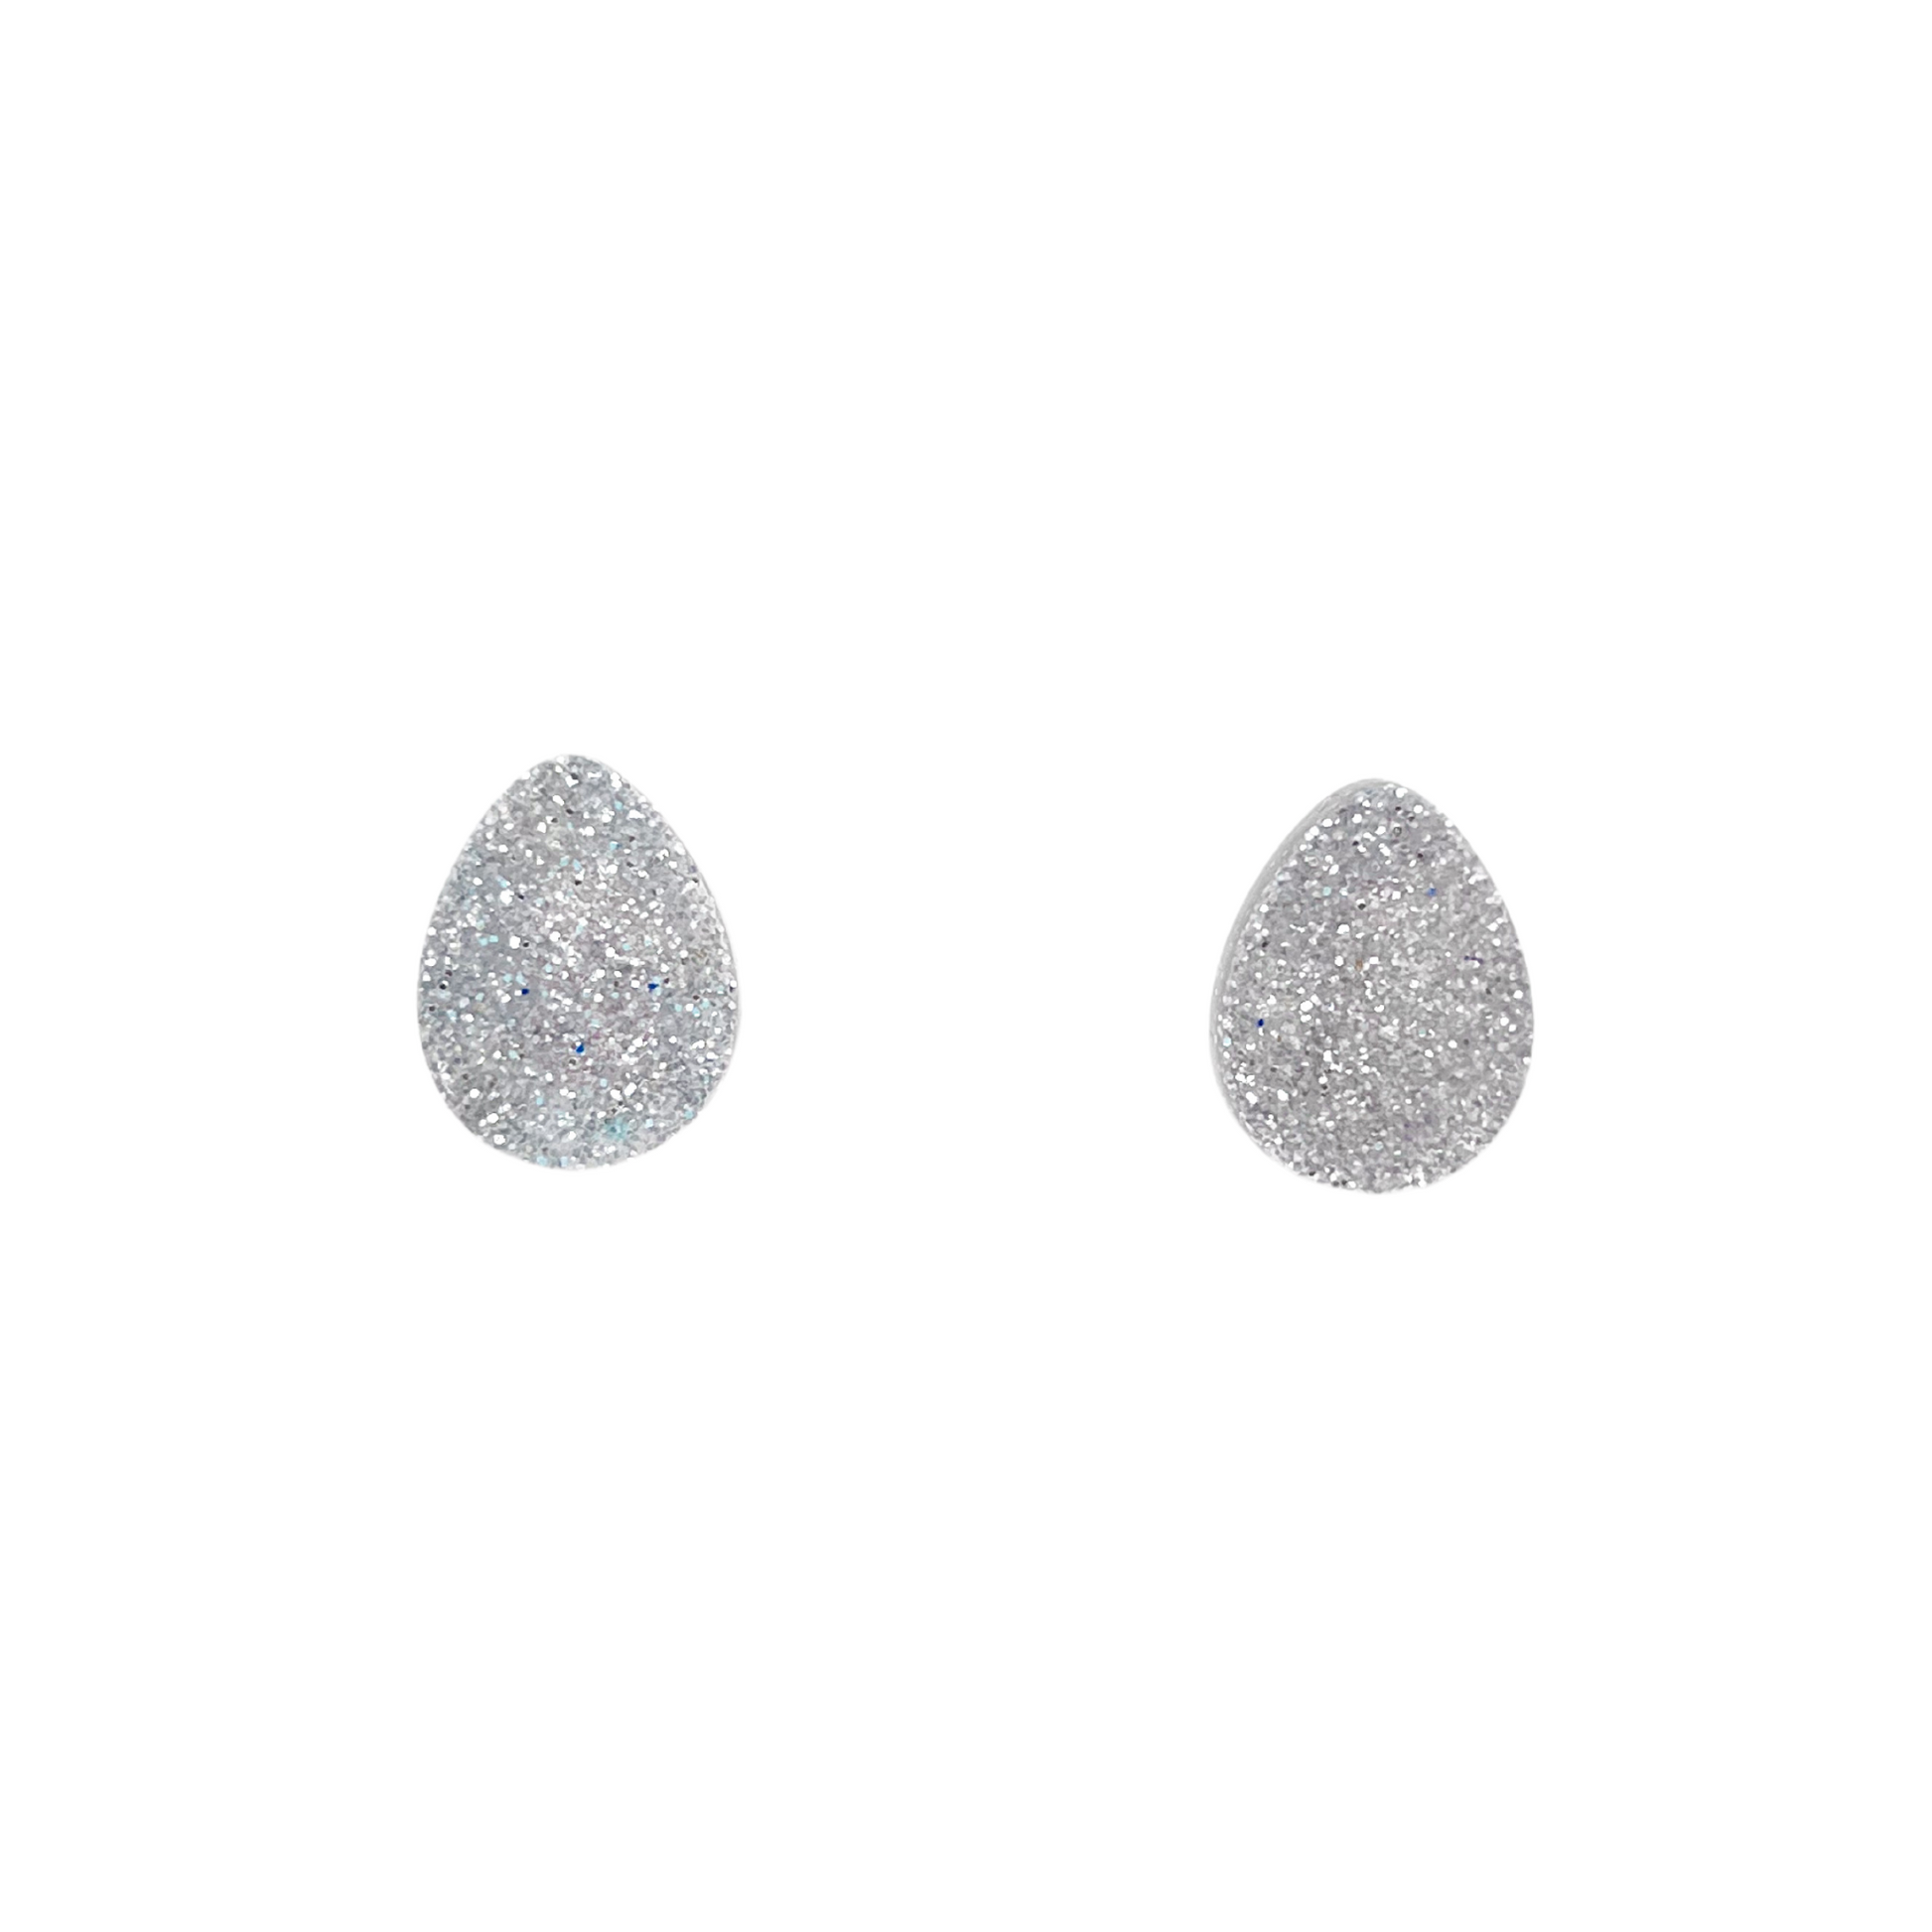 Silver Glitter Easter Stud Earrings with Hypoallergenic Titanium NZ